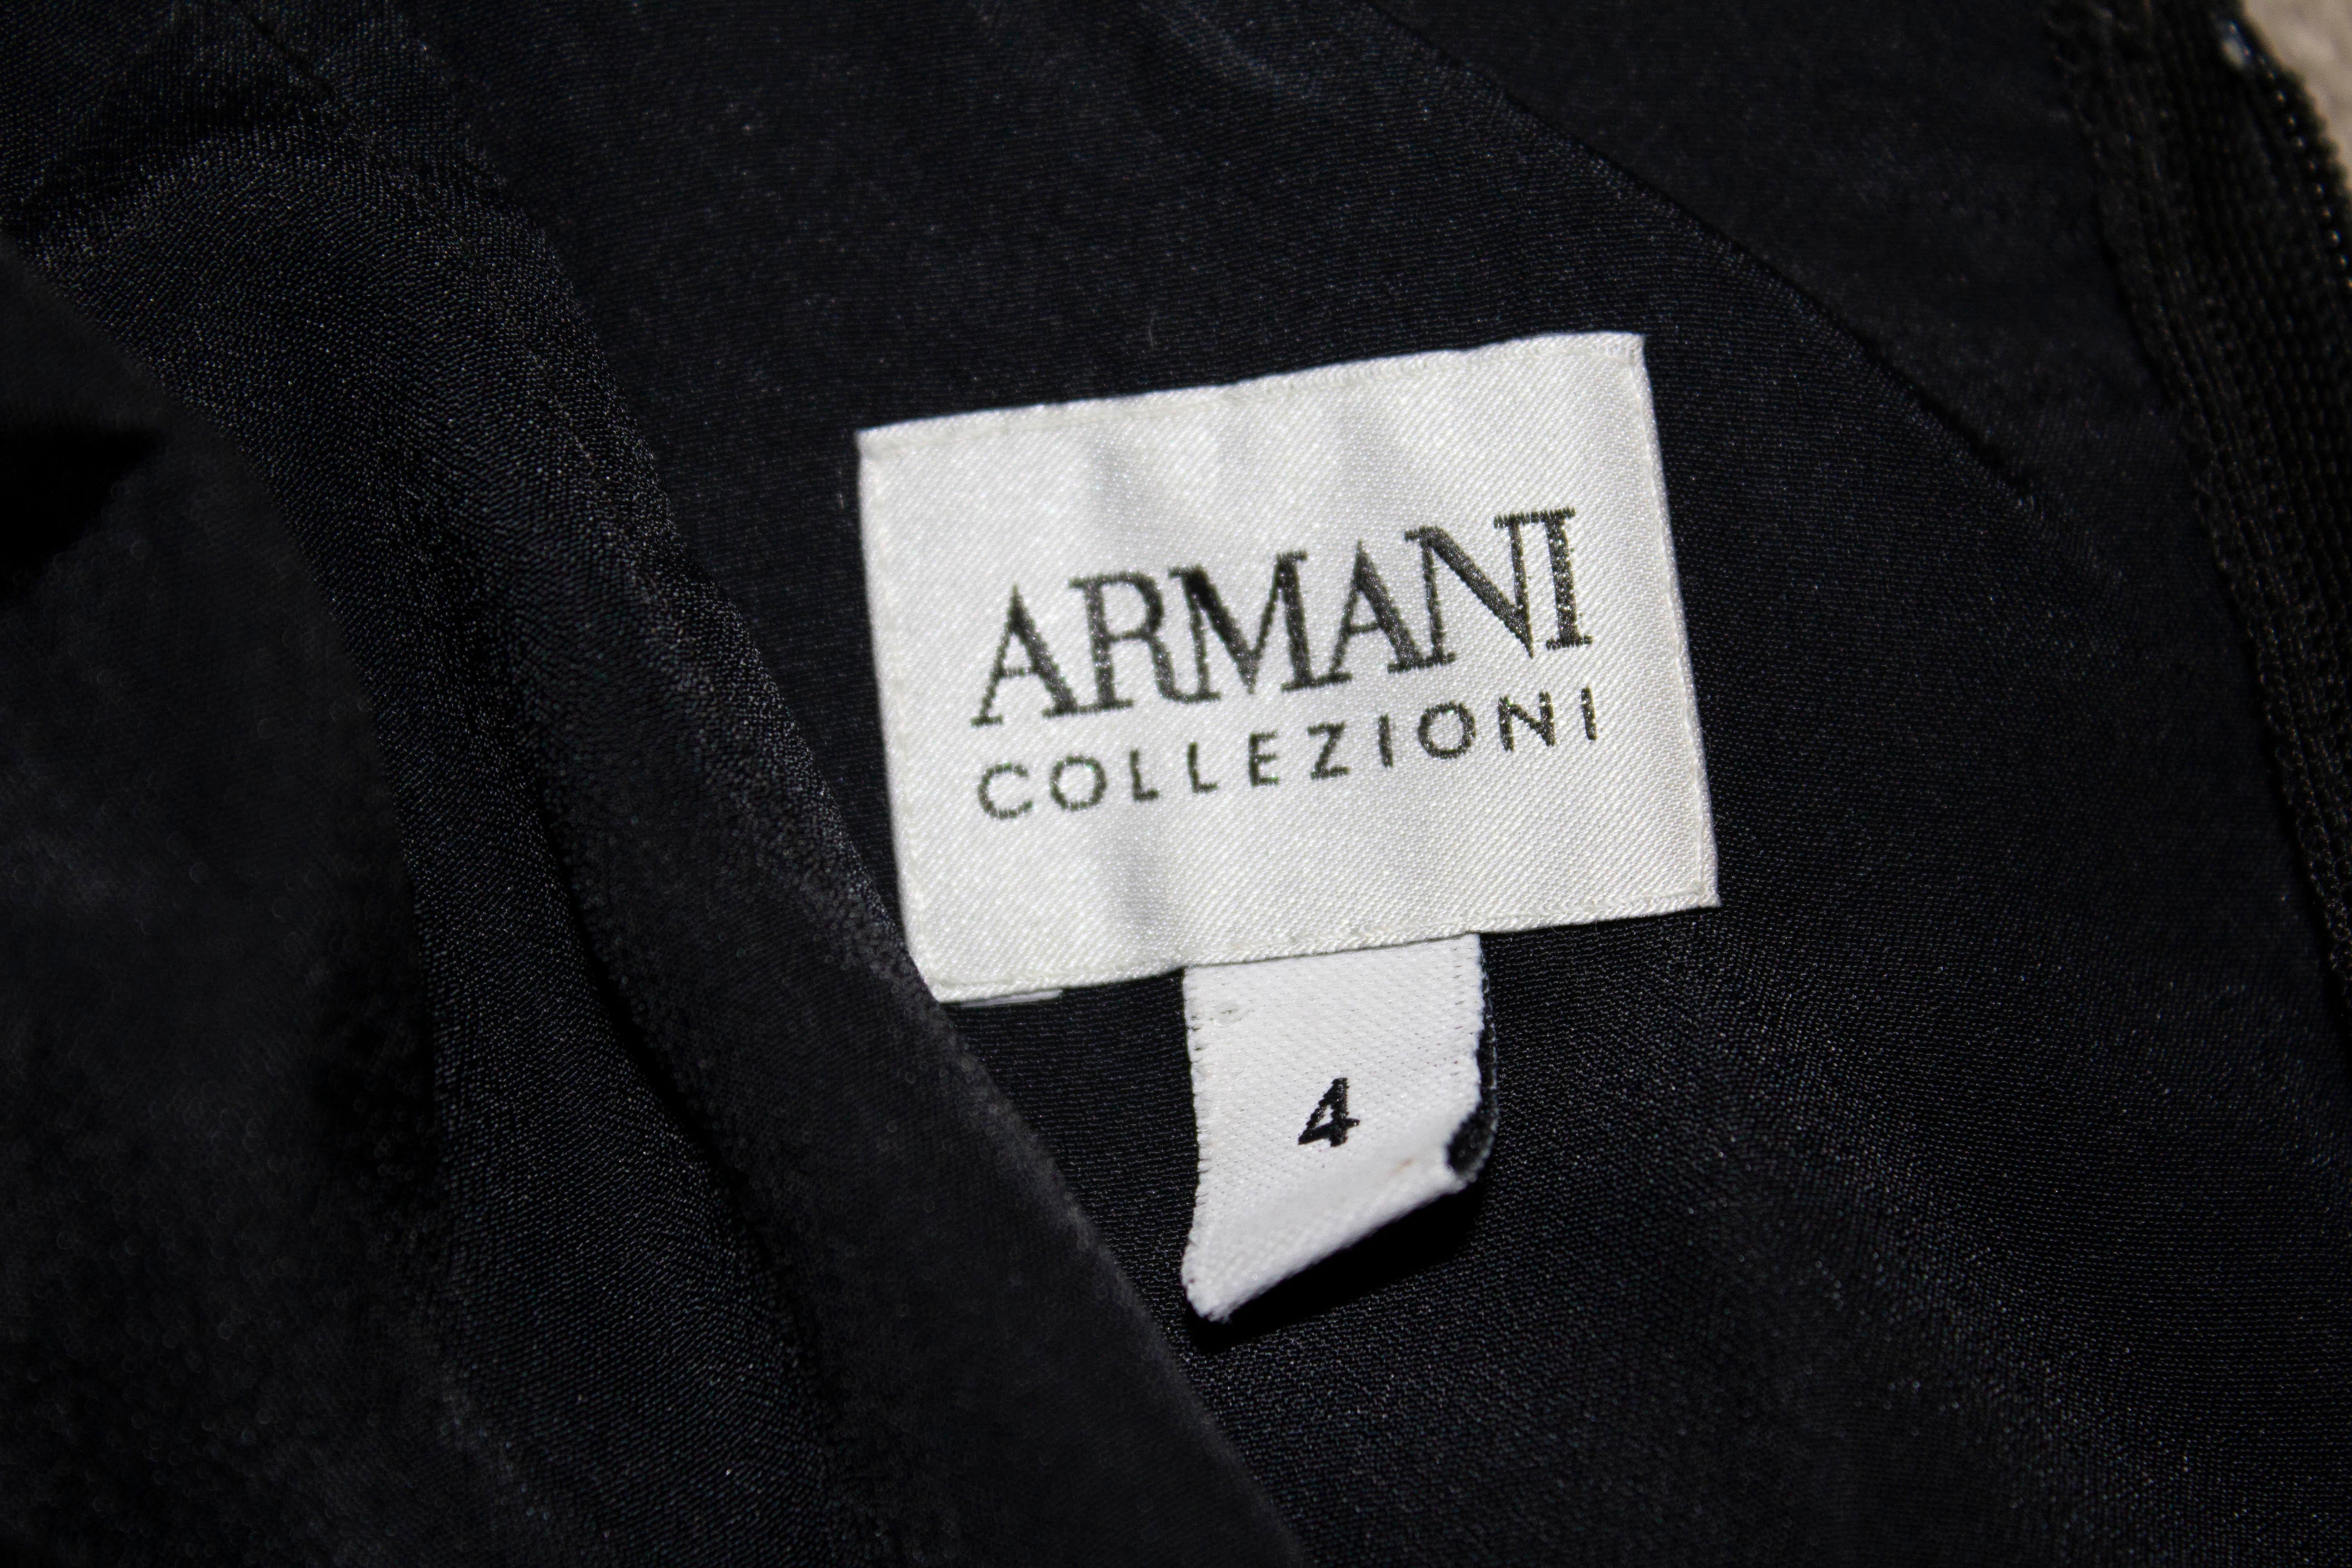 A chic black cocktail dress by Armani Collezzioni, The dress has a pleated skirt area and bust with stitching and deicoration around the neckline.  Size 4  Bust 34'', waist 29'' length 41''